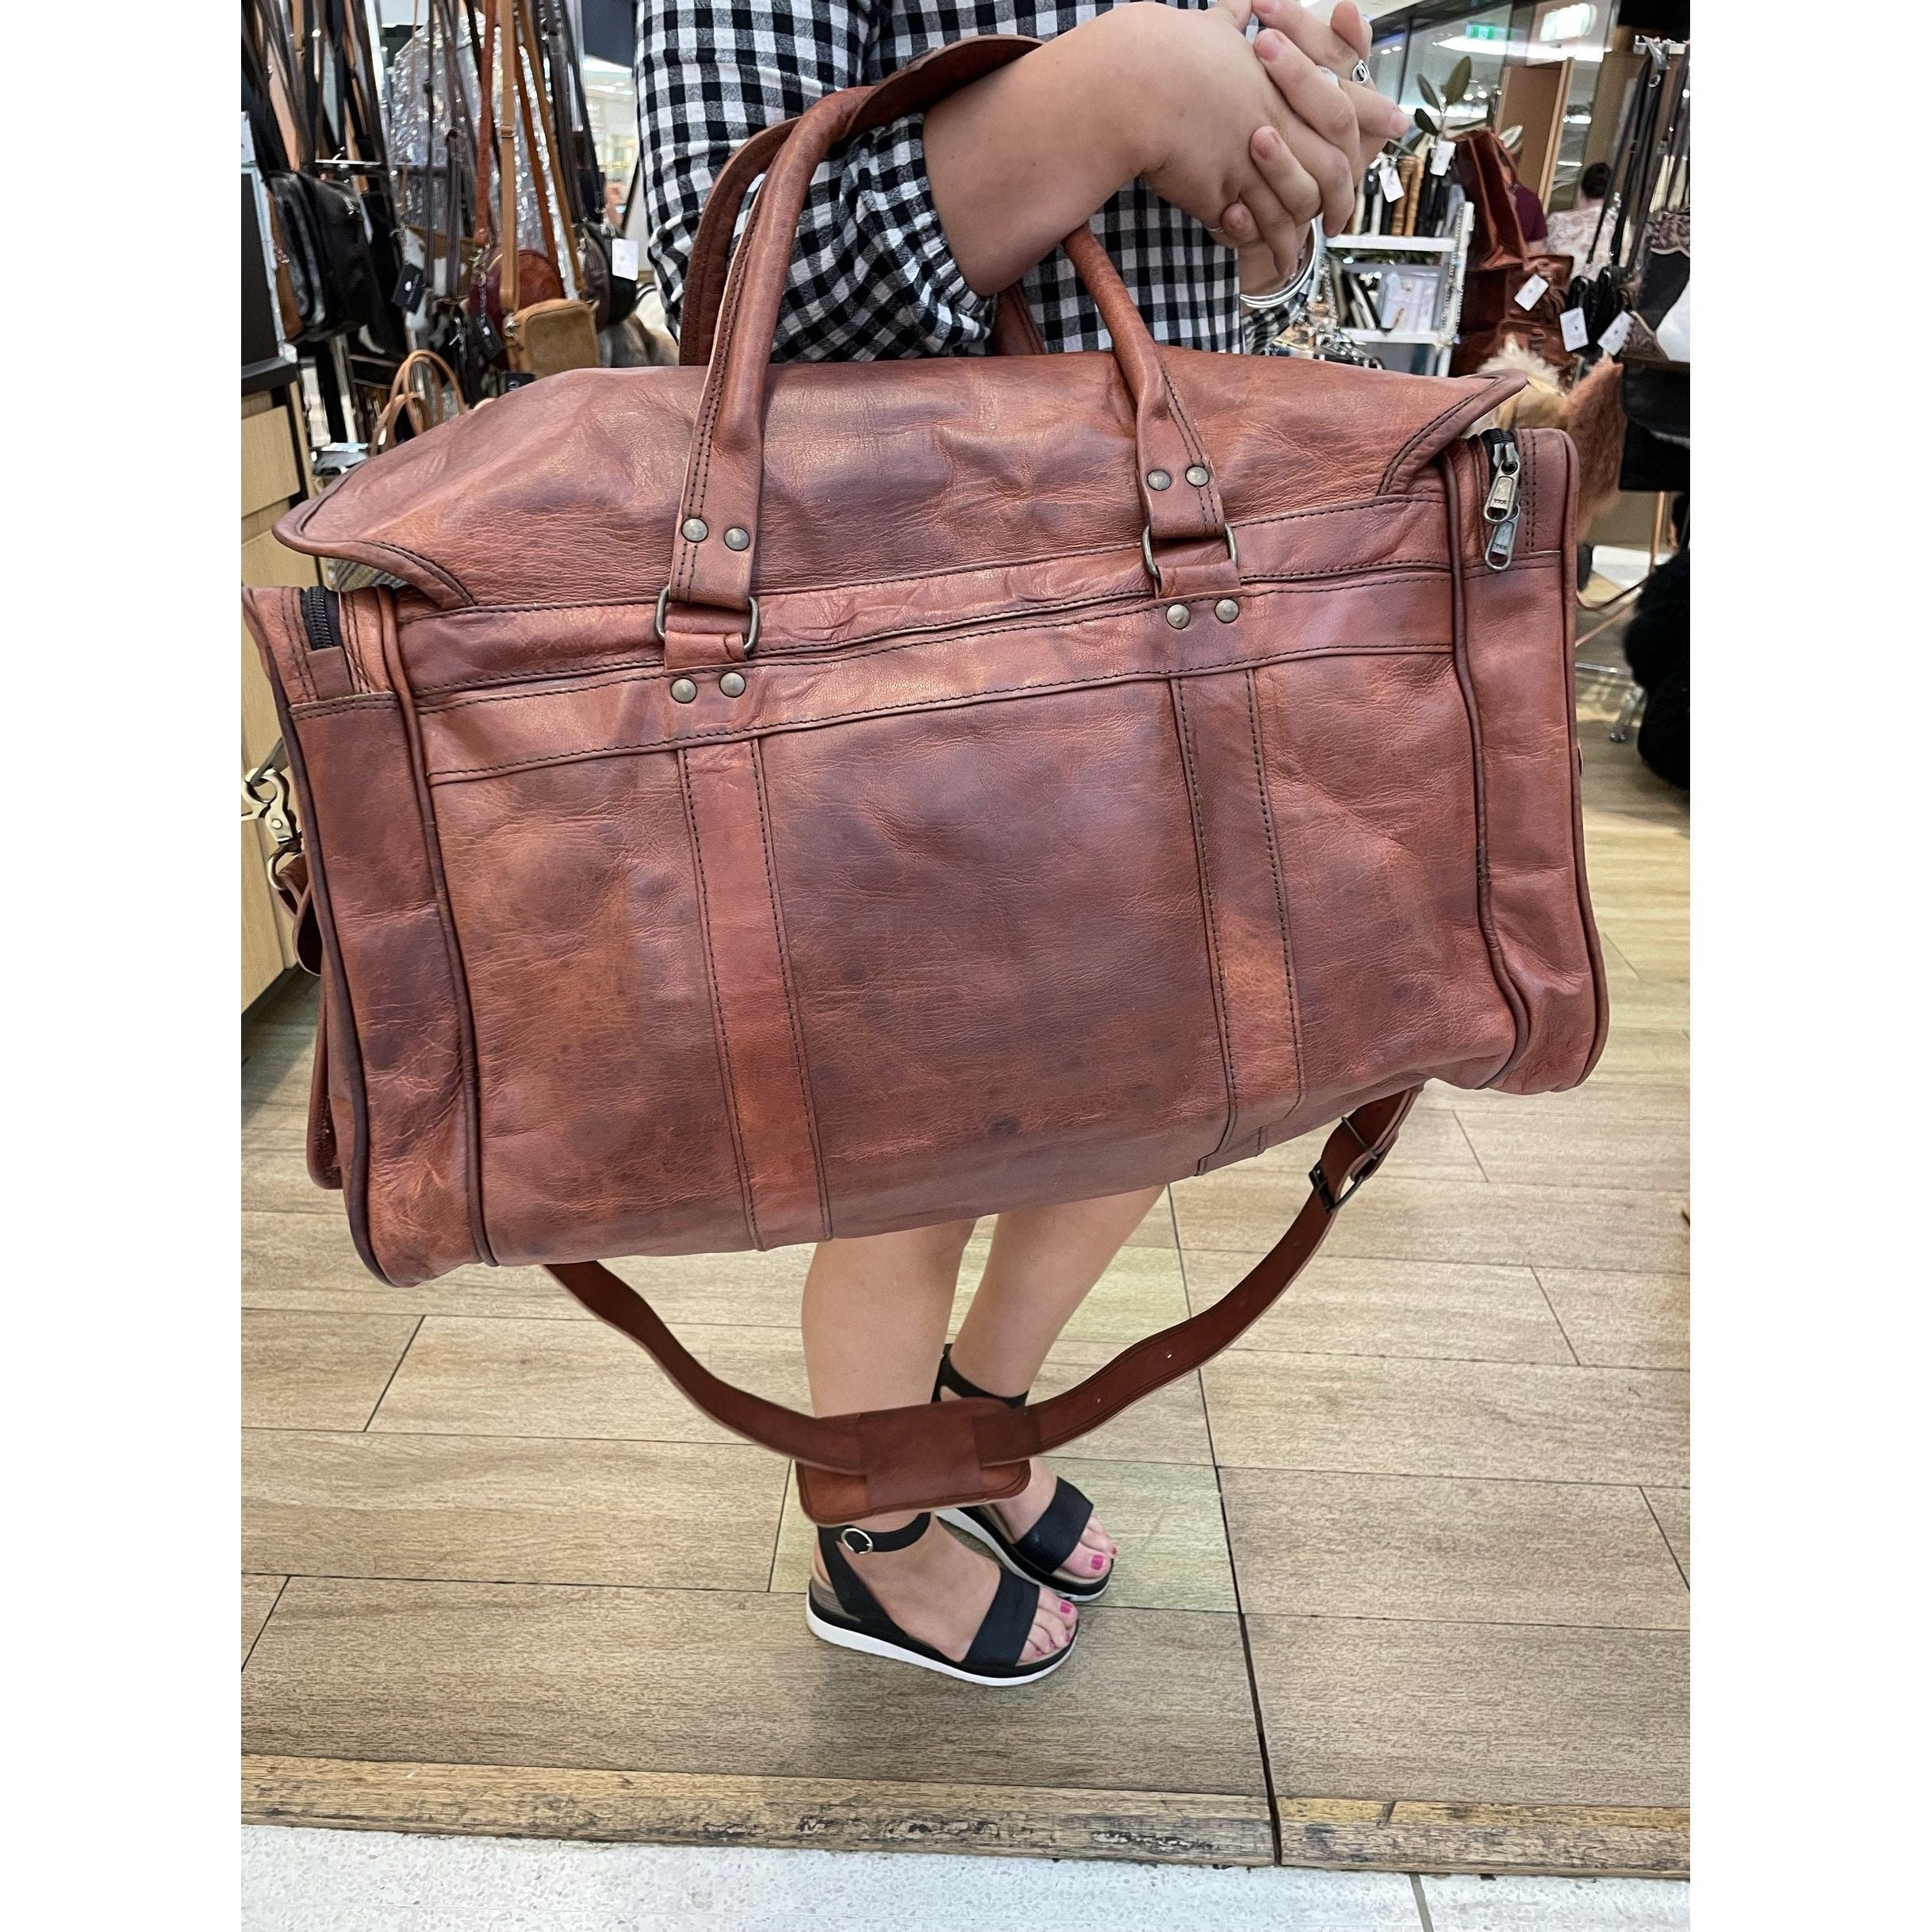 The Superior Leather Bag